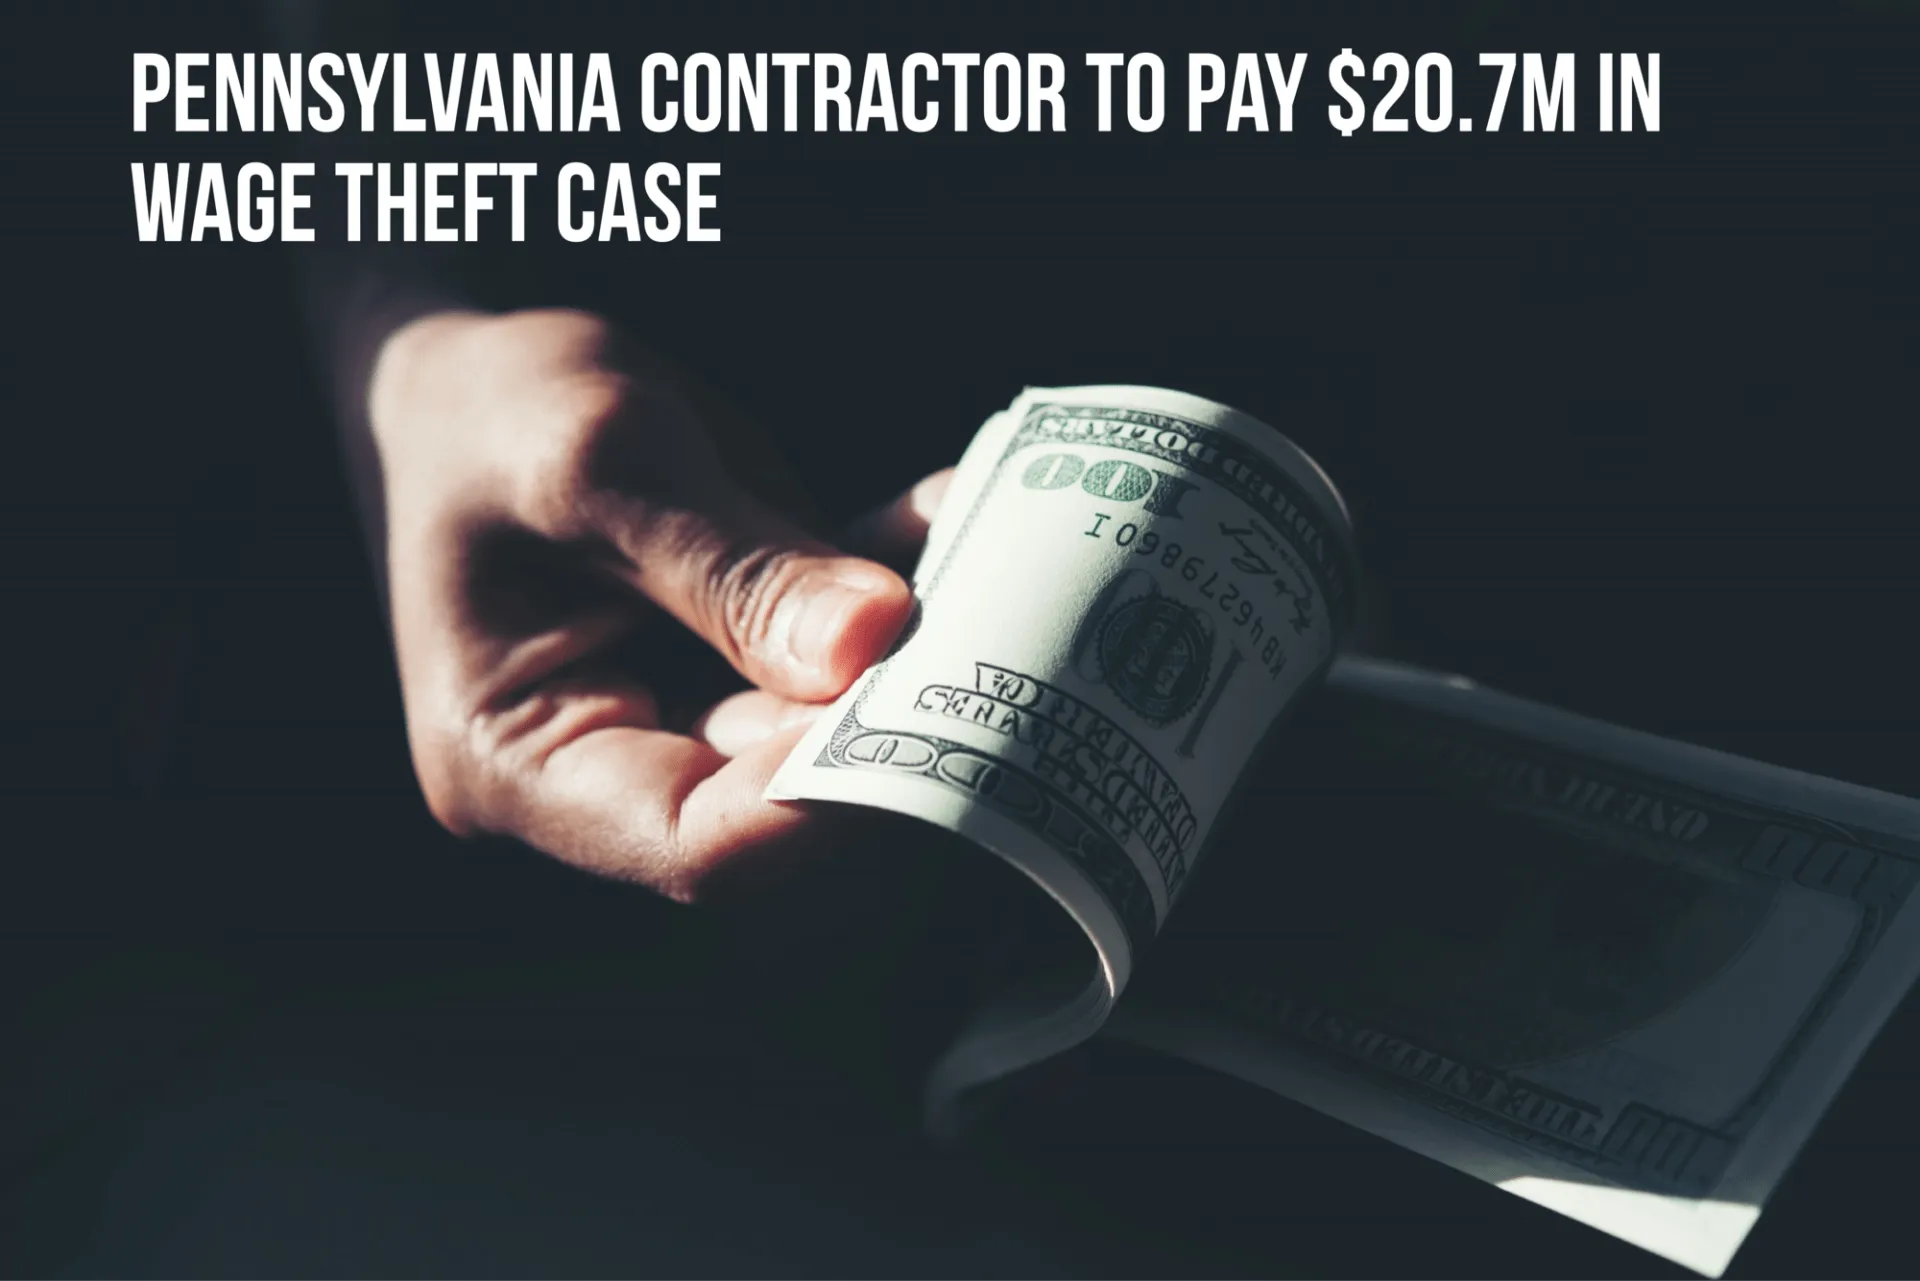 Pennsylvania Contractor to Pay $20.7M In Wage Theft Case